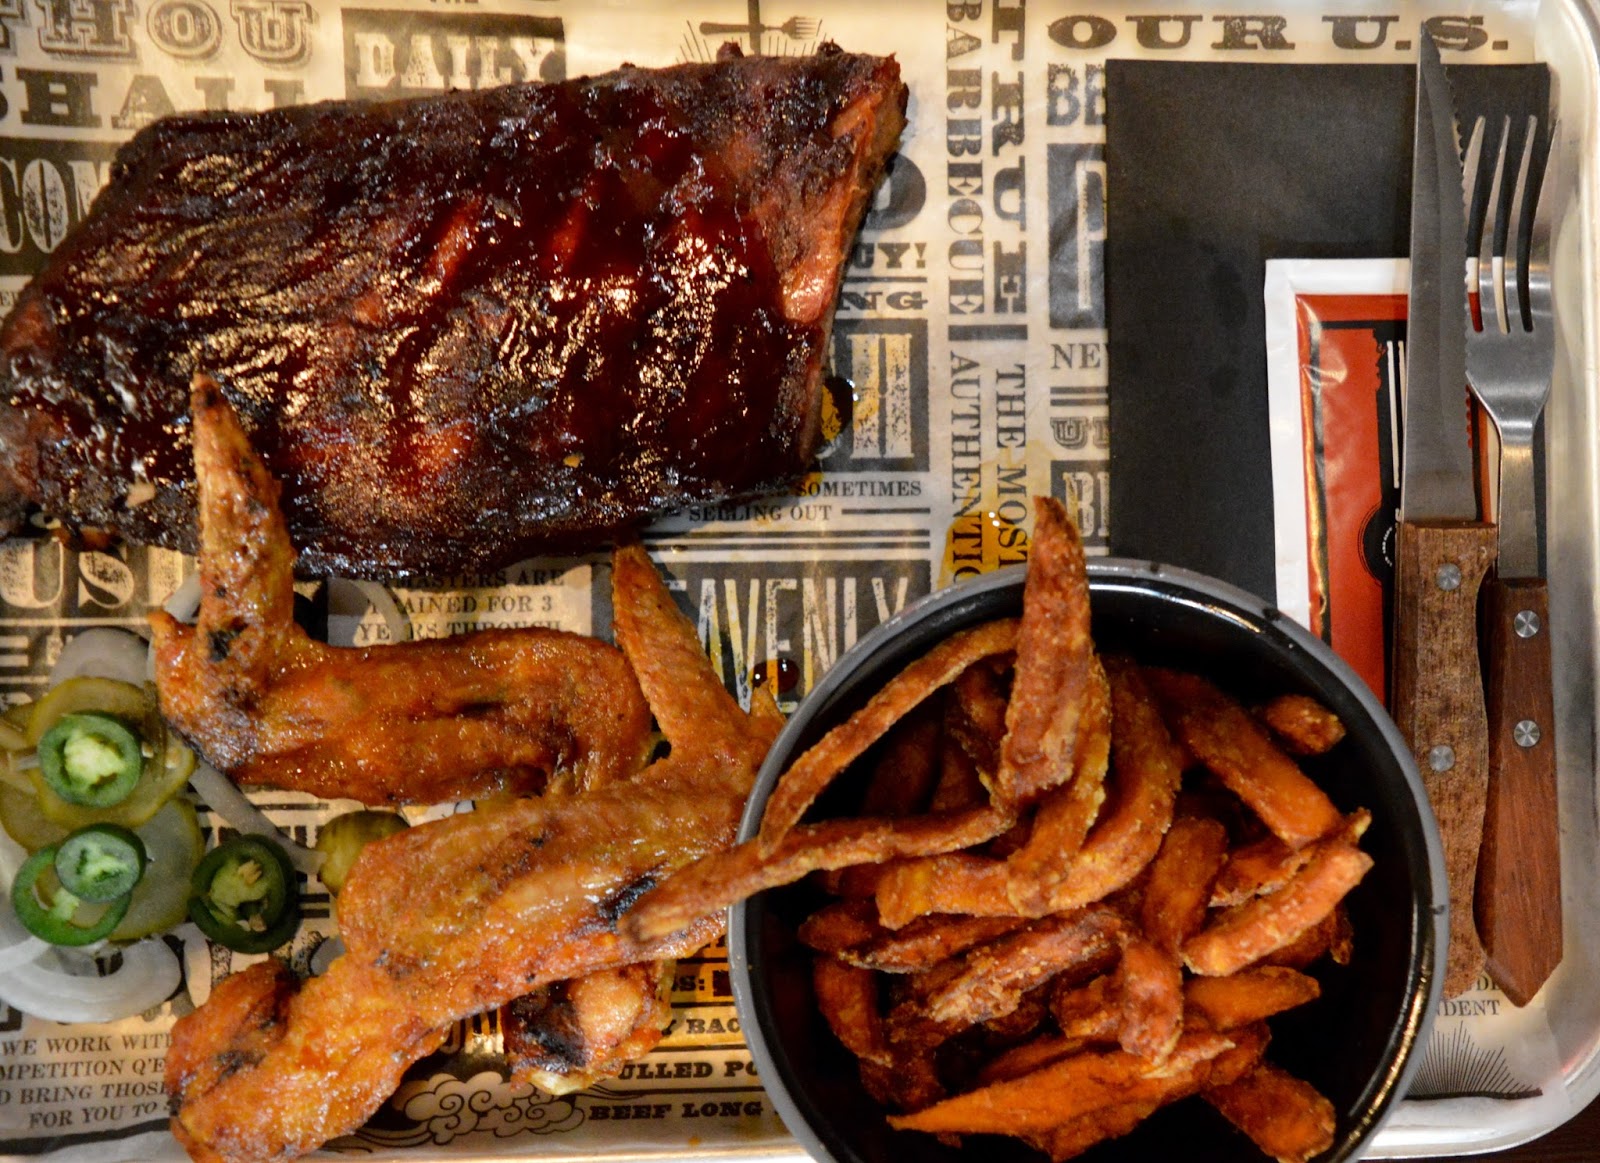 Red's True BBQ Newcastle | Menu Review (including Children's Menu) - baby back ribs with buffalo wings and sweet potato fries